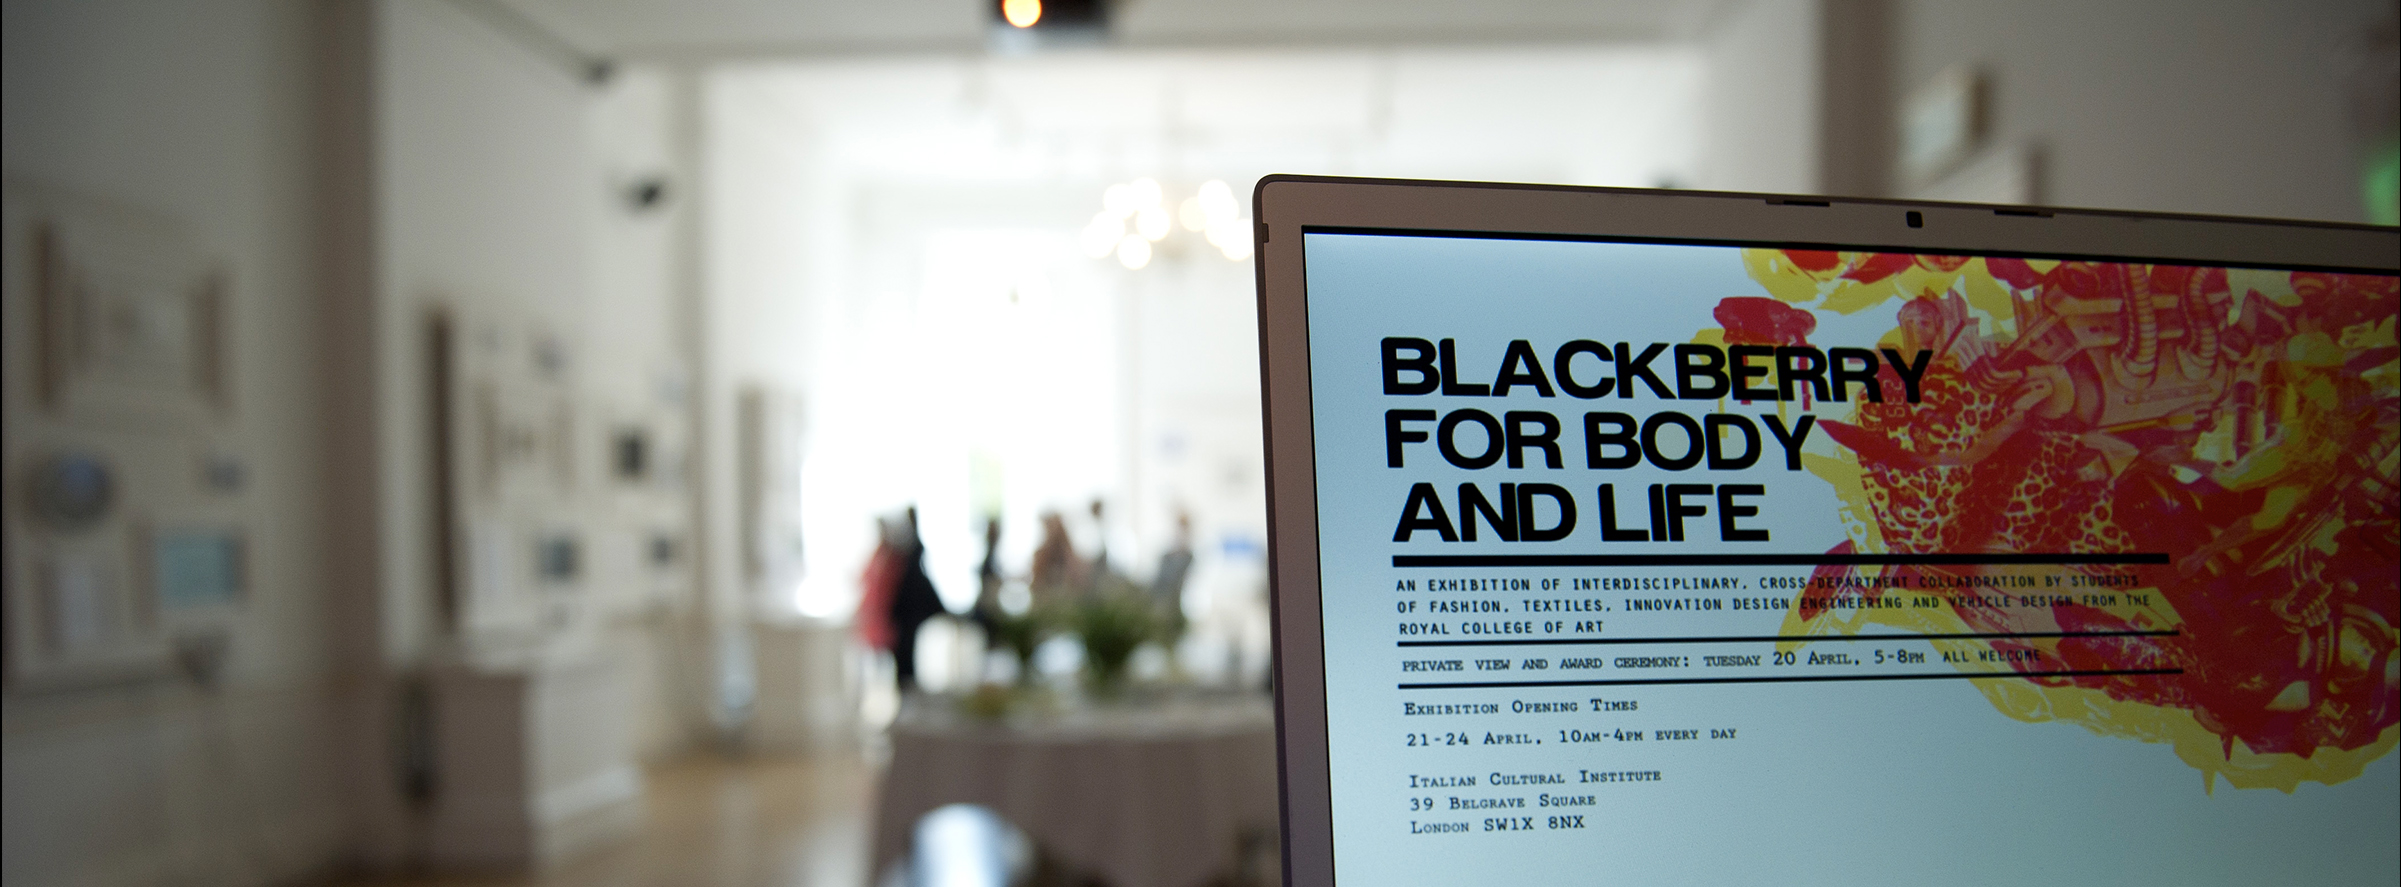  Curation of the exhibition  "Blackberry or body and for Life" , London 2010 